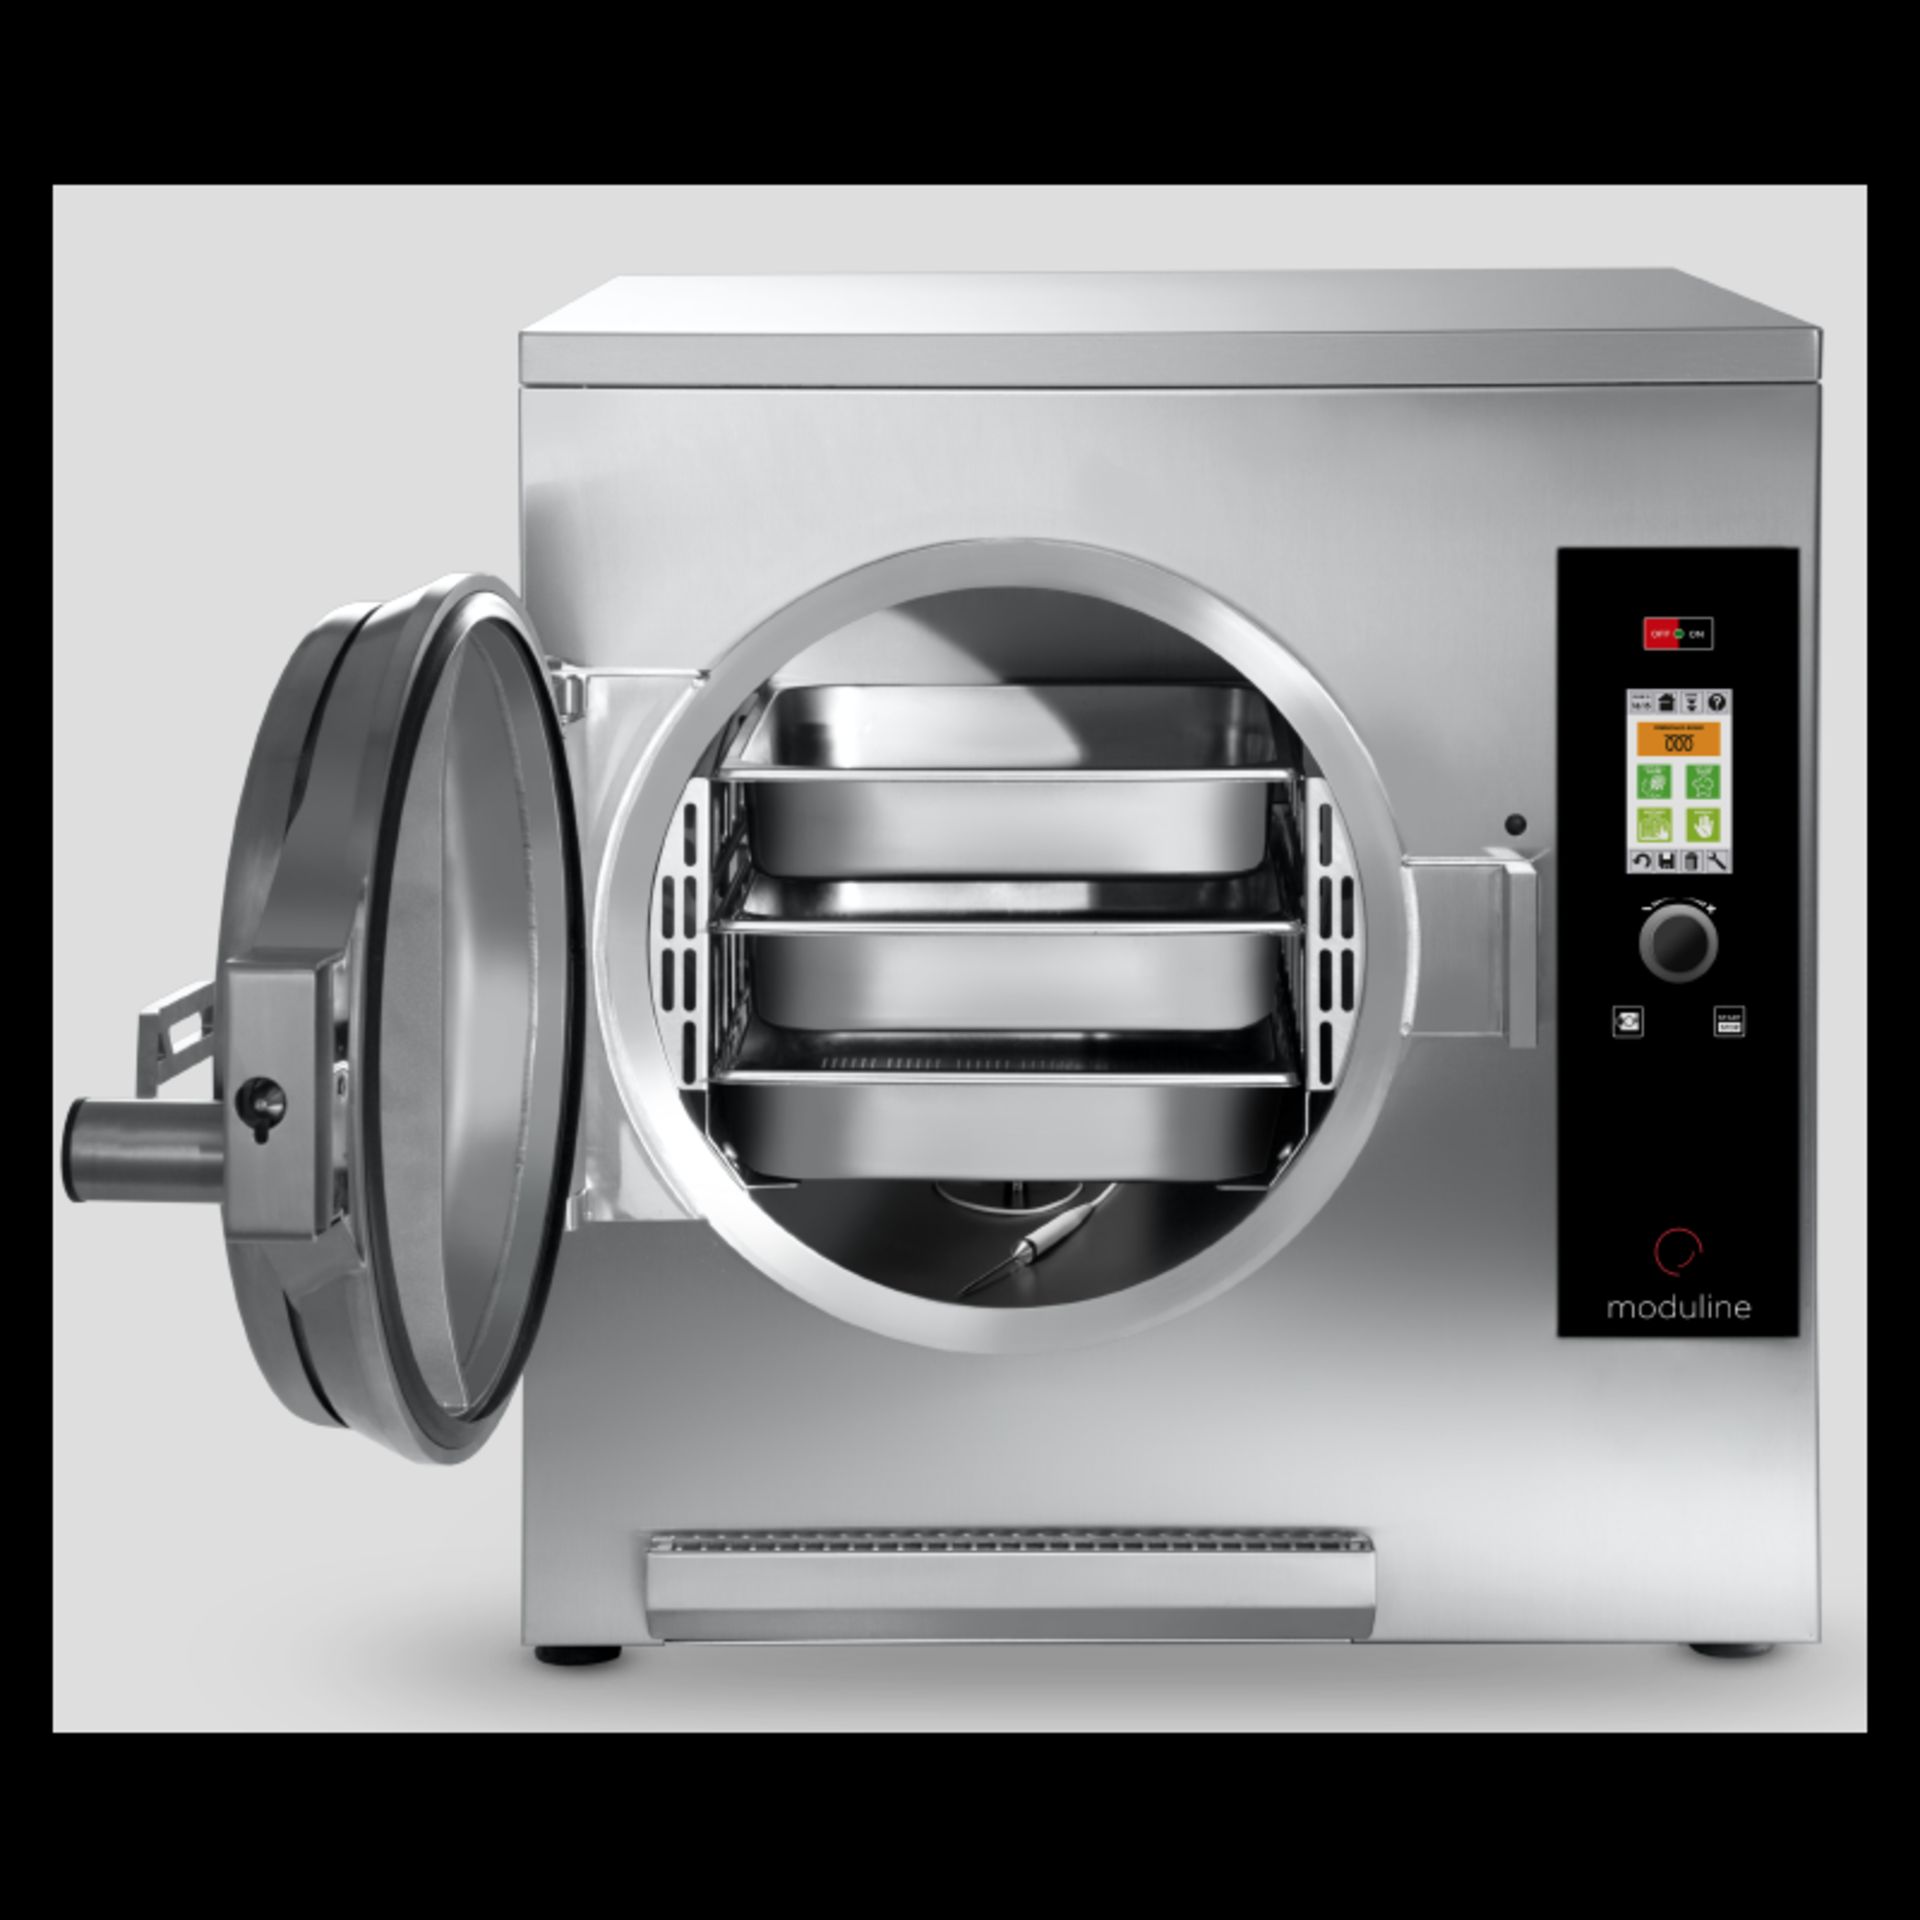 1 x Moduline Cook and Hold Convection Oven and Pressure Steamer Cooker - Features USB Connection, - Image 16 of 16